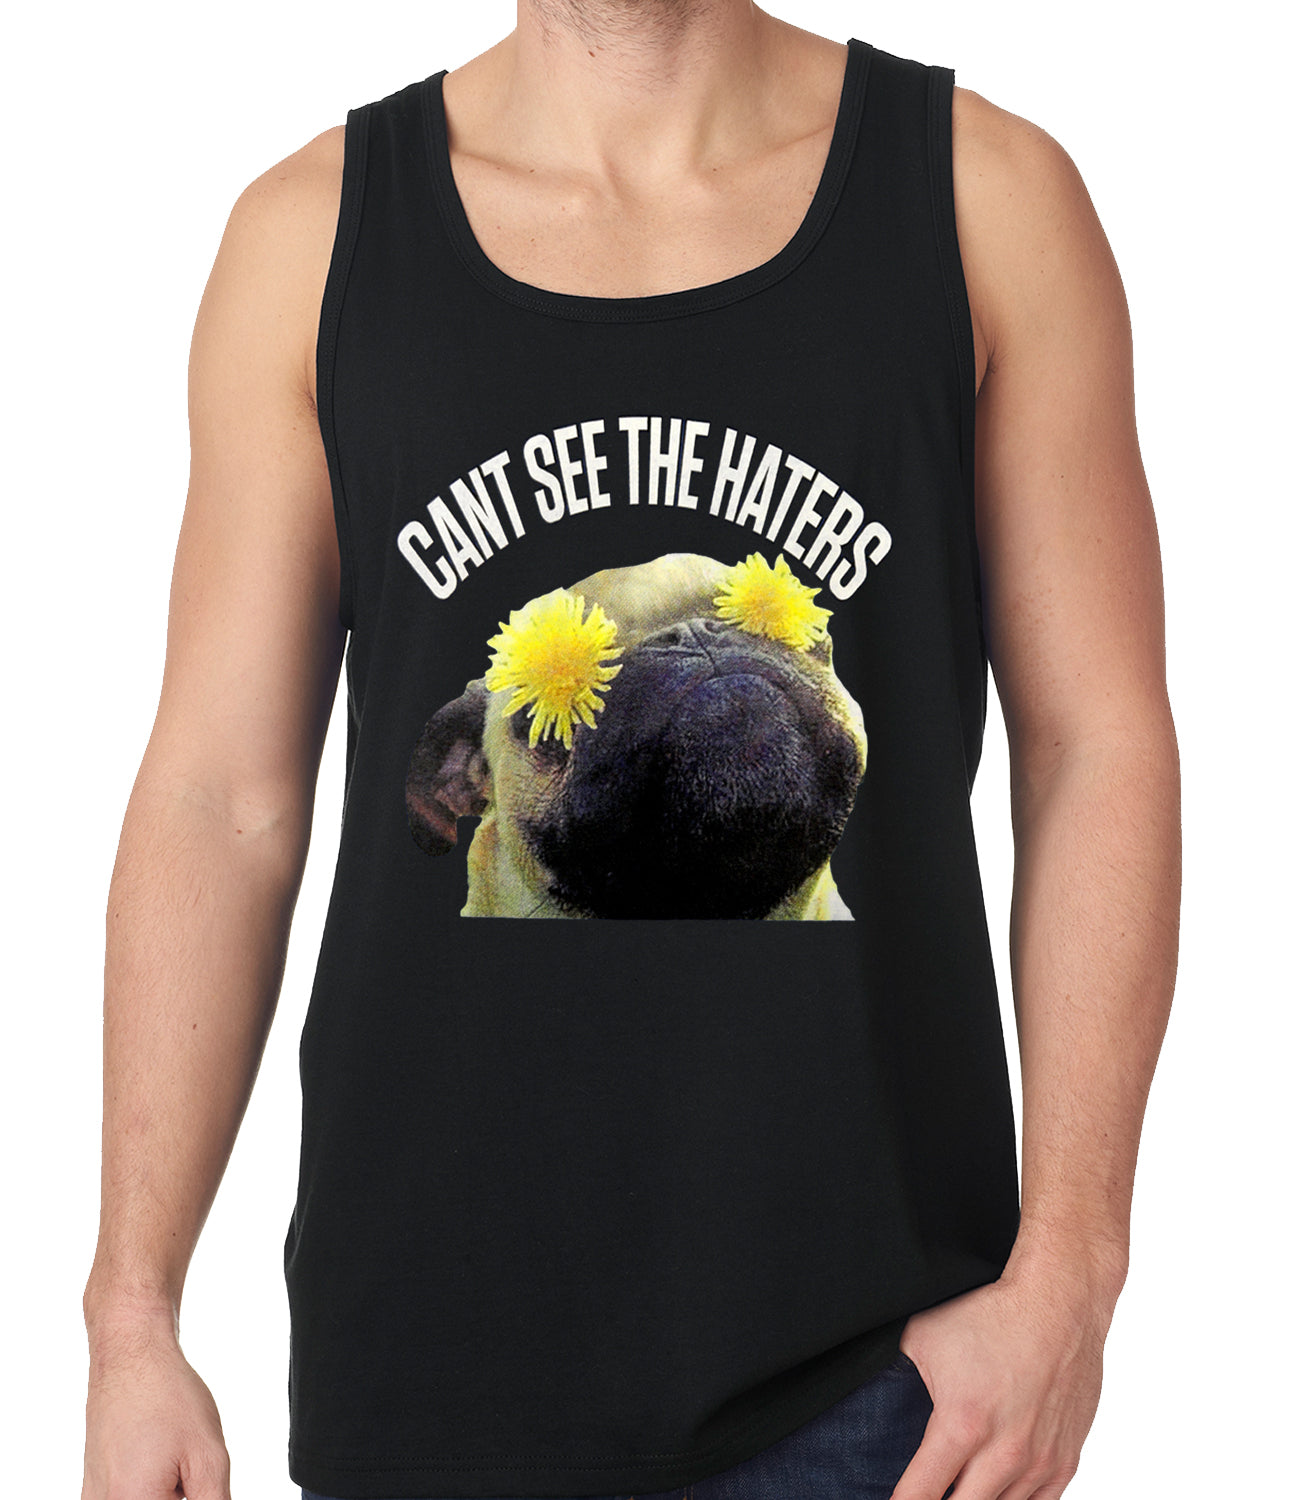 Can't See The Haters Funny Pug Tank Top